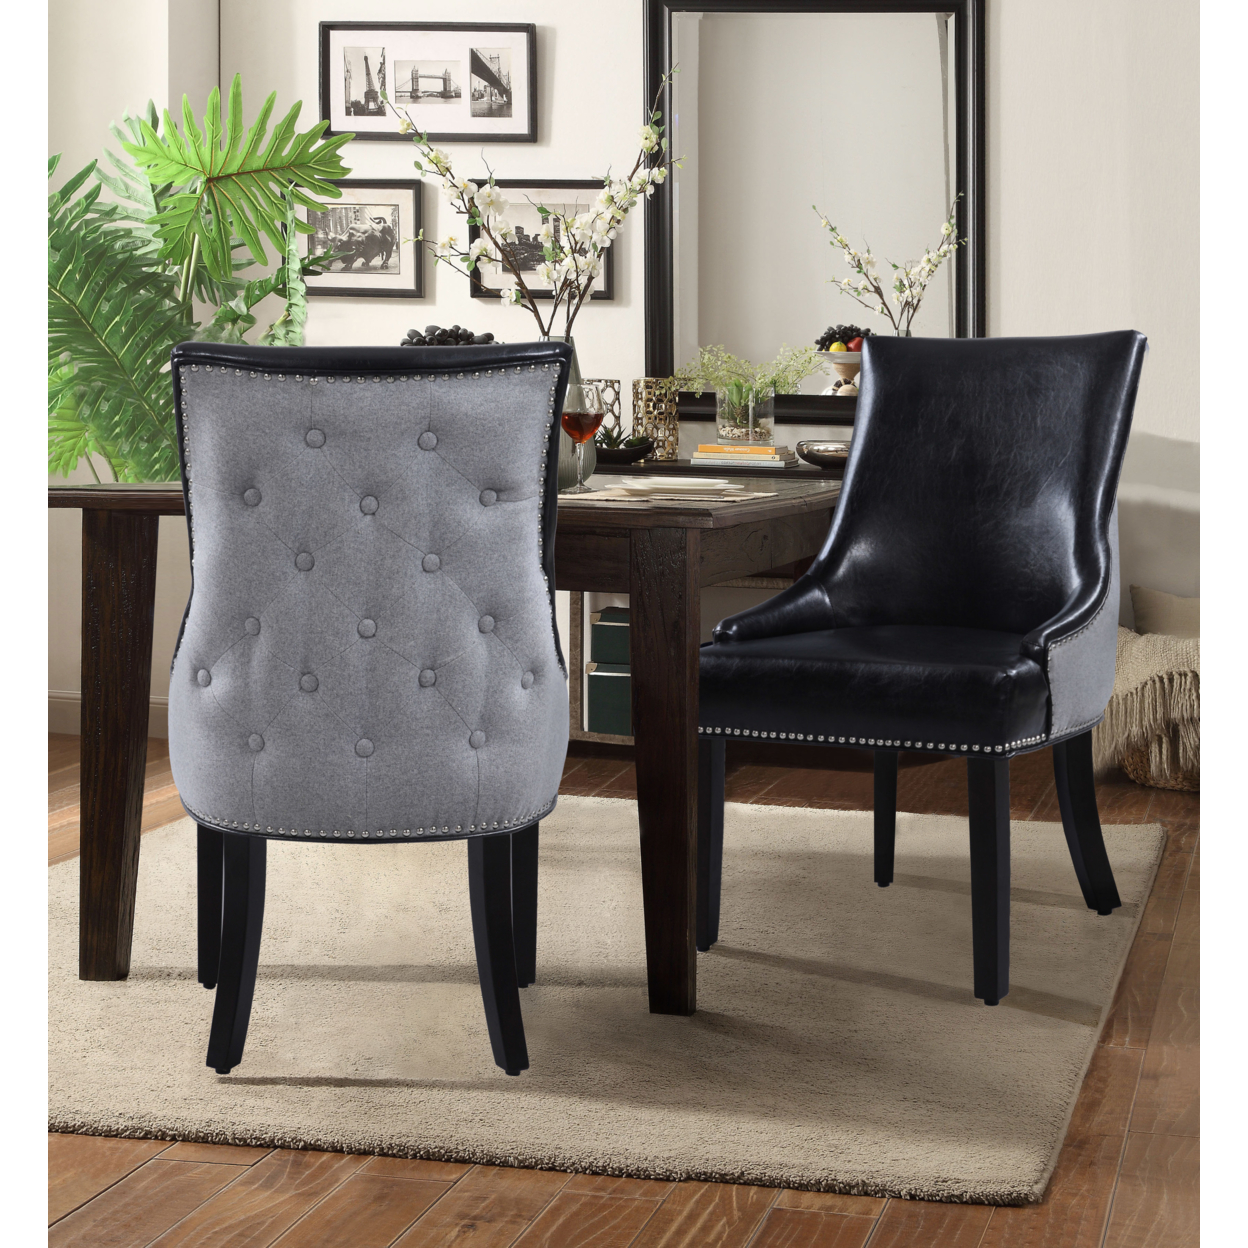 Taylor PU Leather Dining Chair, Set Of 2, Linen Button Tufted With Silver Nailhead Solid Birch Legs - Grey